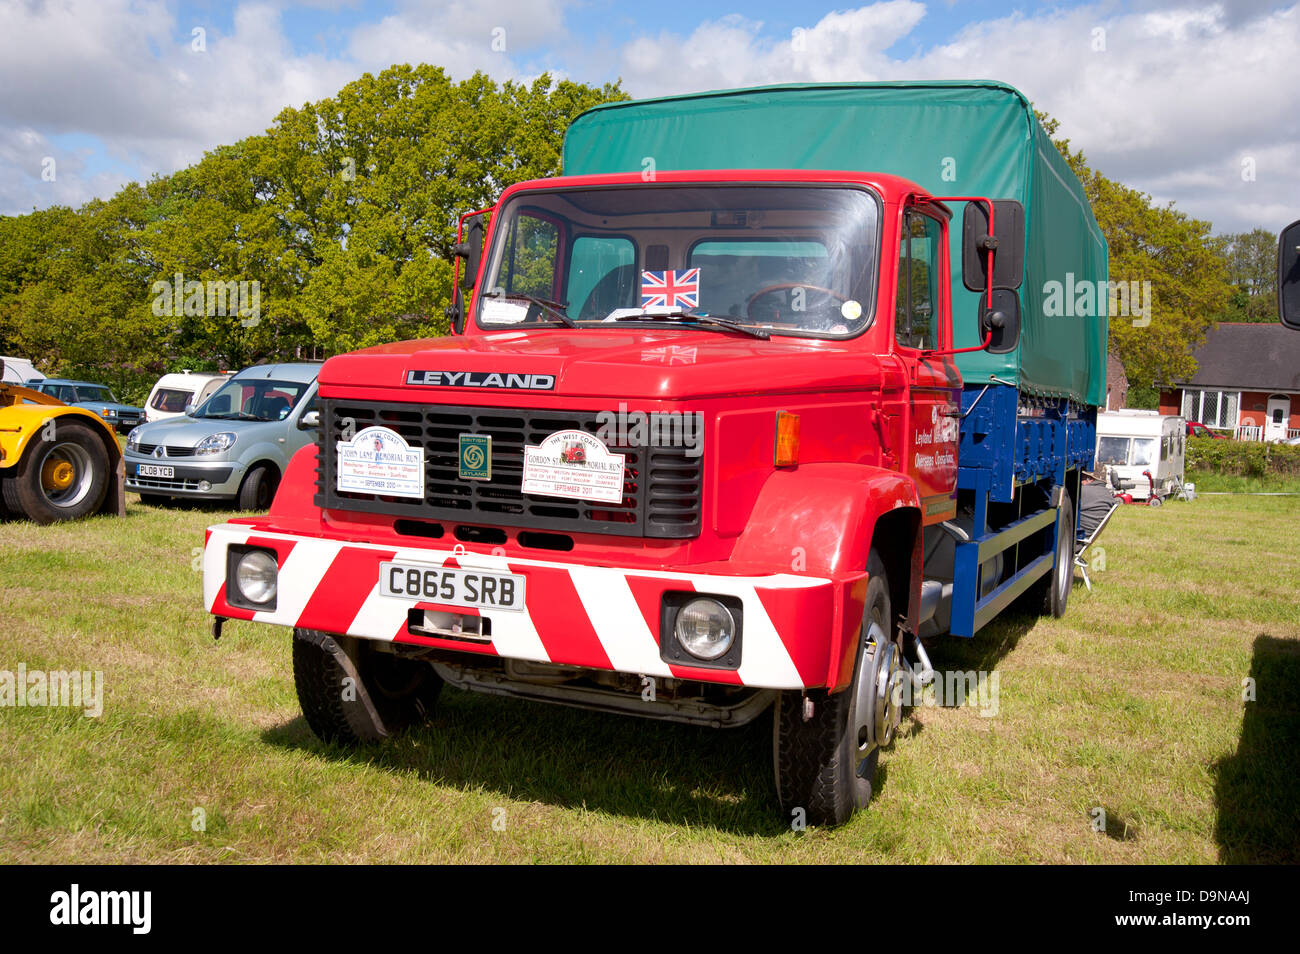 Leyland Landmaster 12-15, in the livery of Leyland Vehicles Overseas Operations,at Heskin Hall Steam and Vintage Vehicle Rally Stock Photo